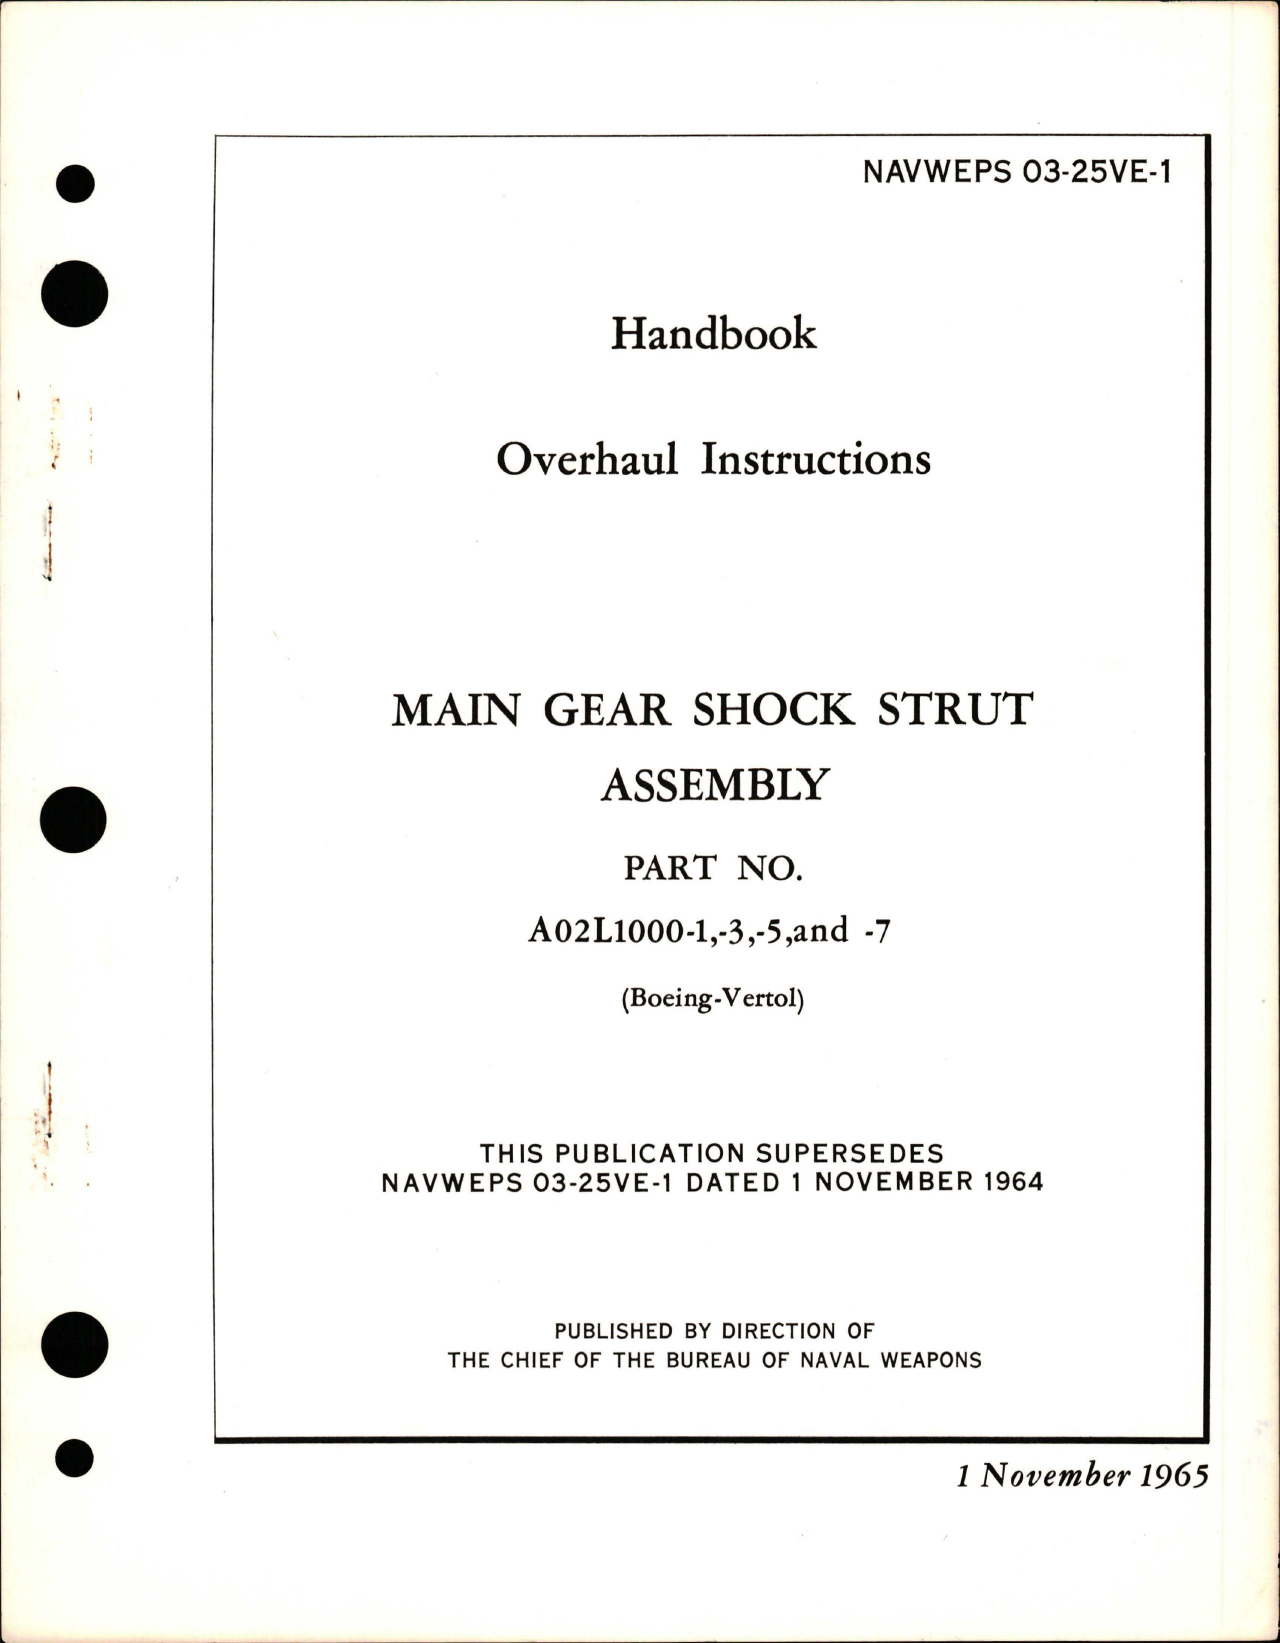 Sample page 1 from AirCorps Library document: Overhaul Instructions for Main Gear Shock Strut Assembly - Part A02L1000-1, A02L1000-3, A02L1000-5, and A02L1000-7 